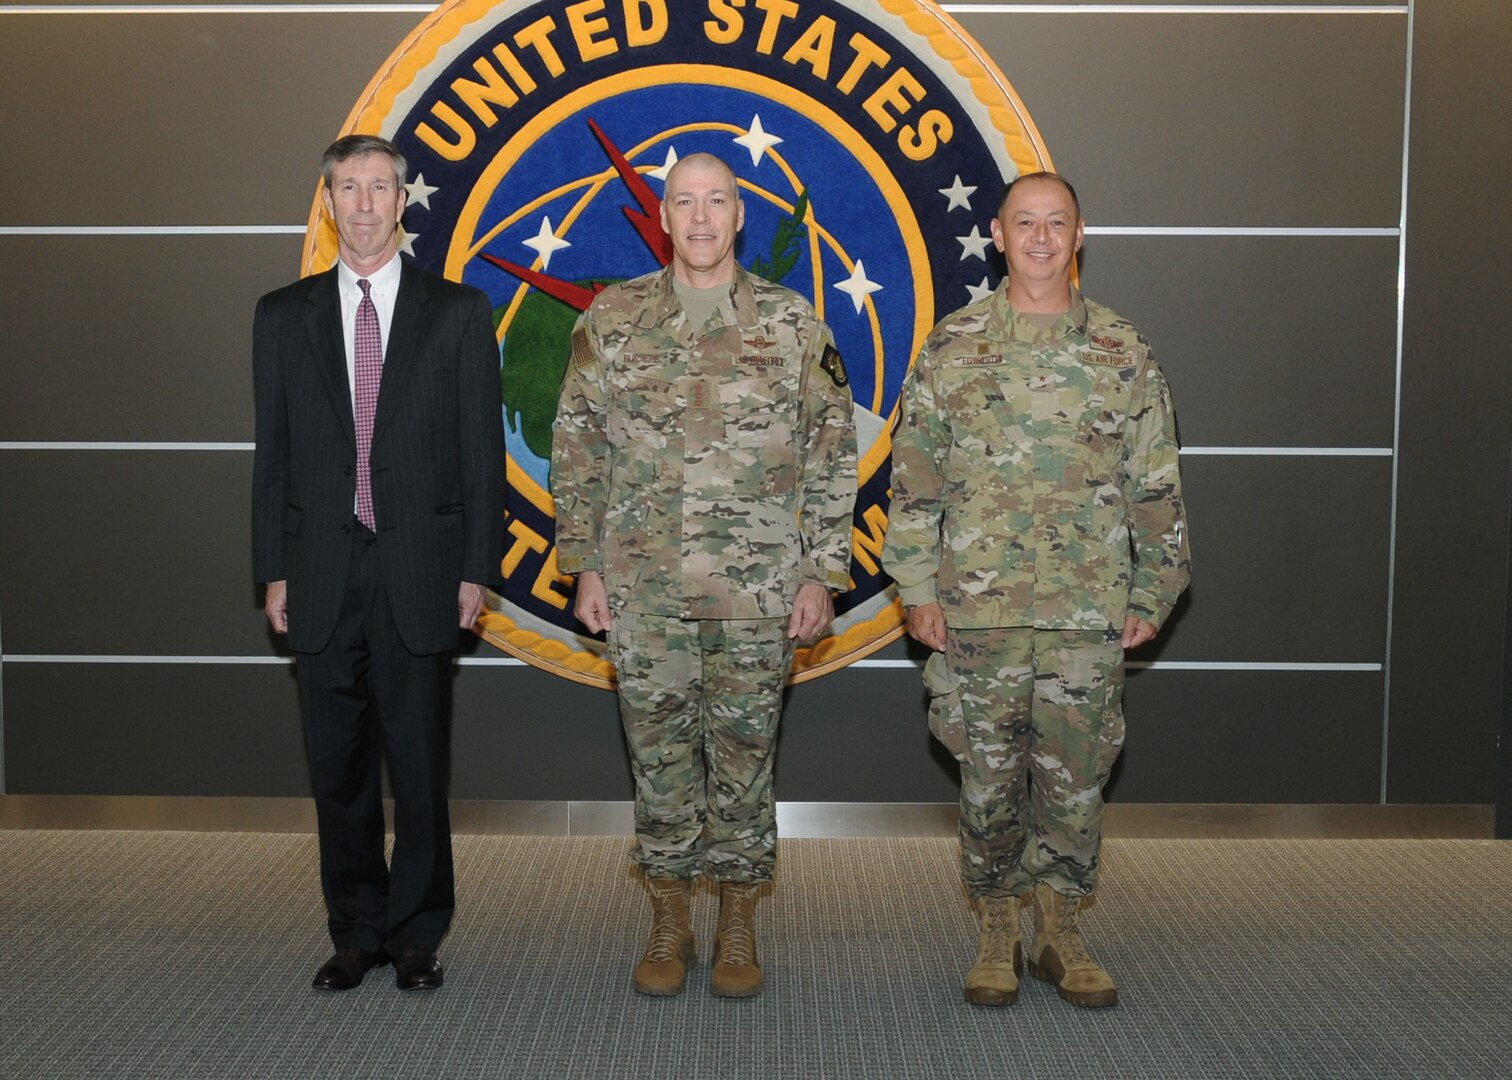 Dr Rhys Williamd Action Director, Defense Threat Reduction Agency, is greeted by LTG Bussier Deputy Commander, USSTRATCOM,